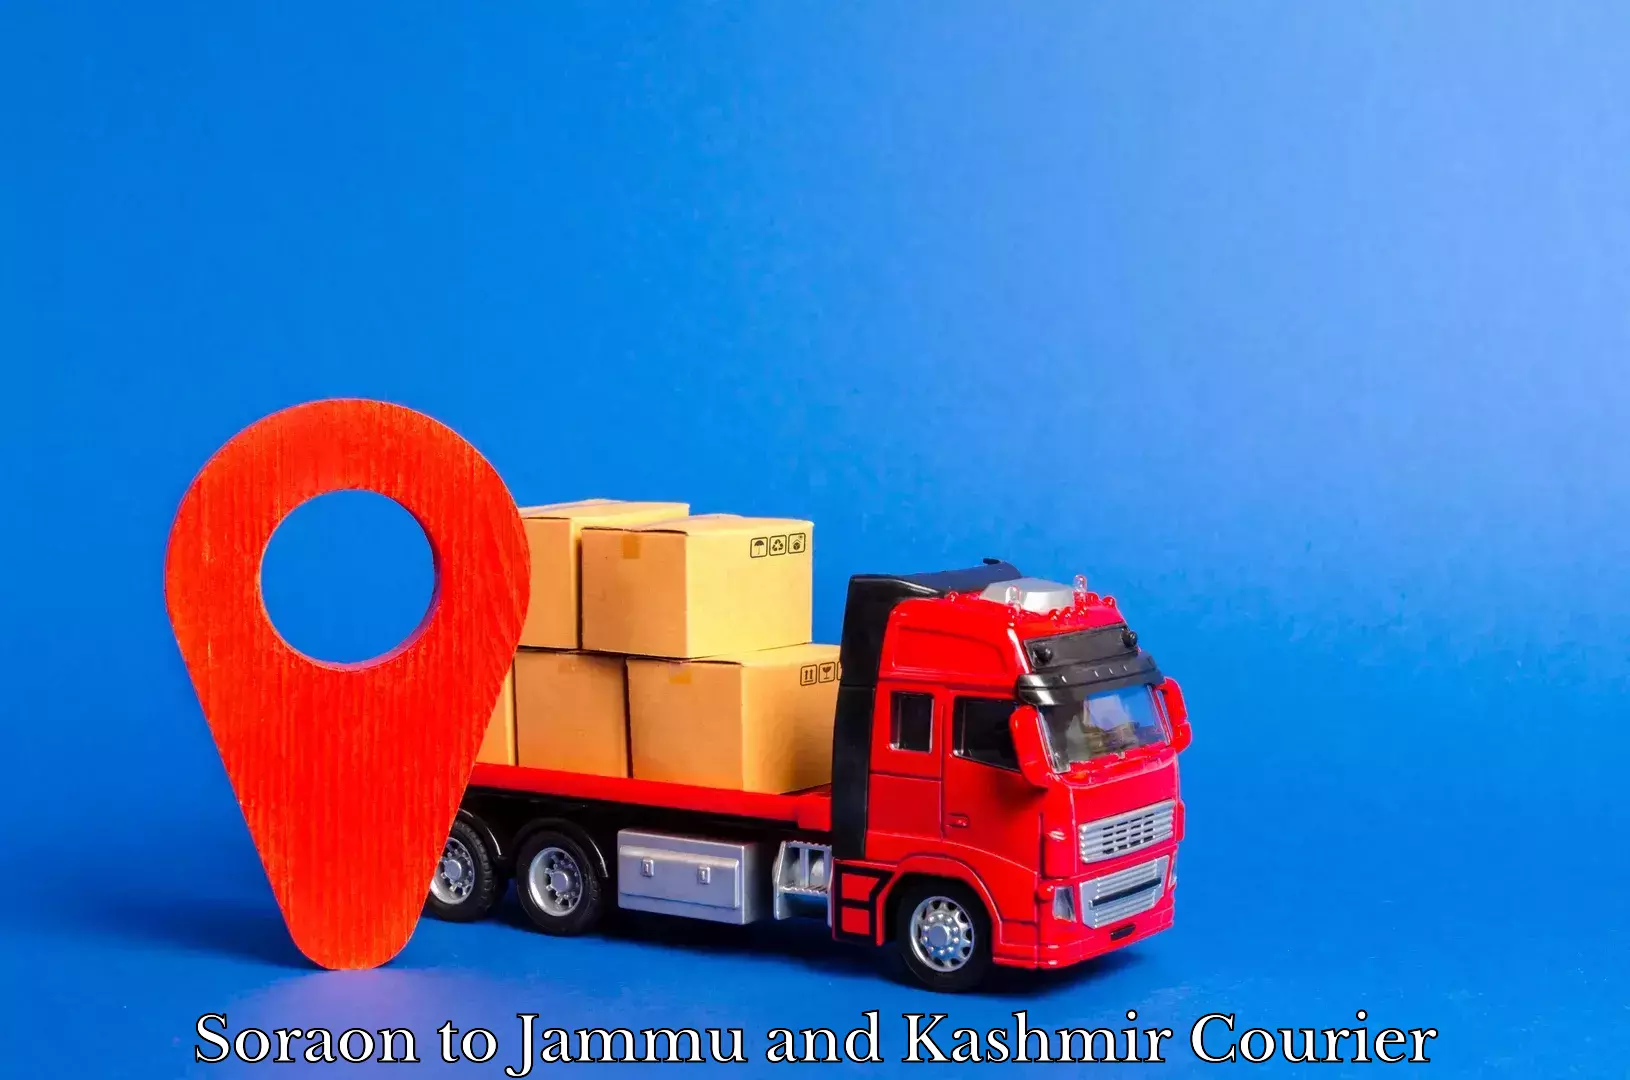 Subscription-based courier Soraon to Jammu and Kashmir